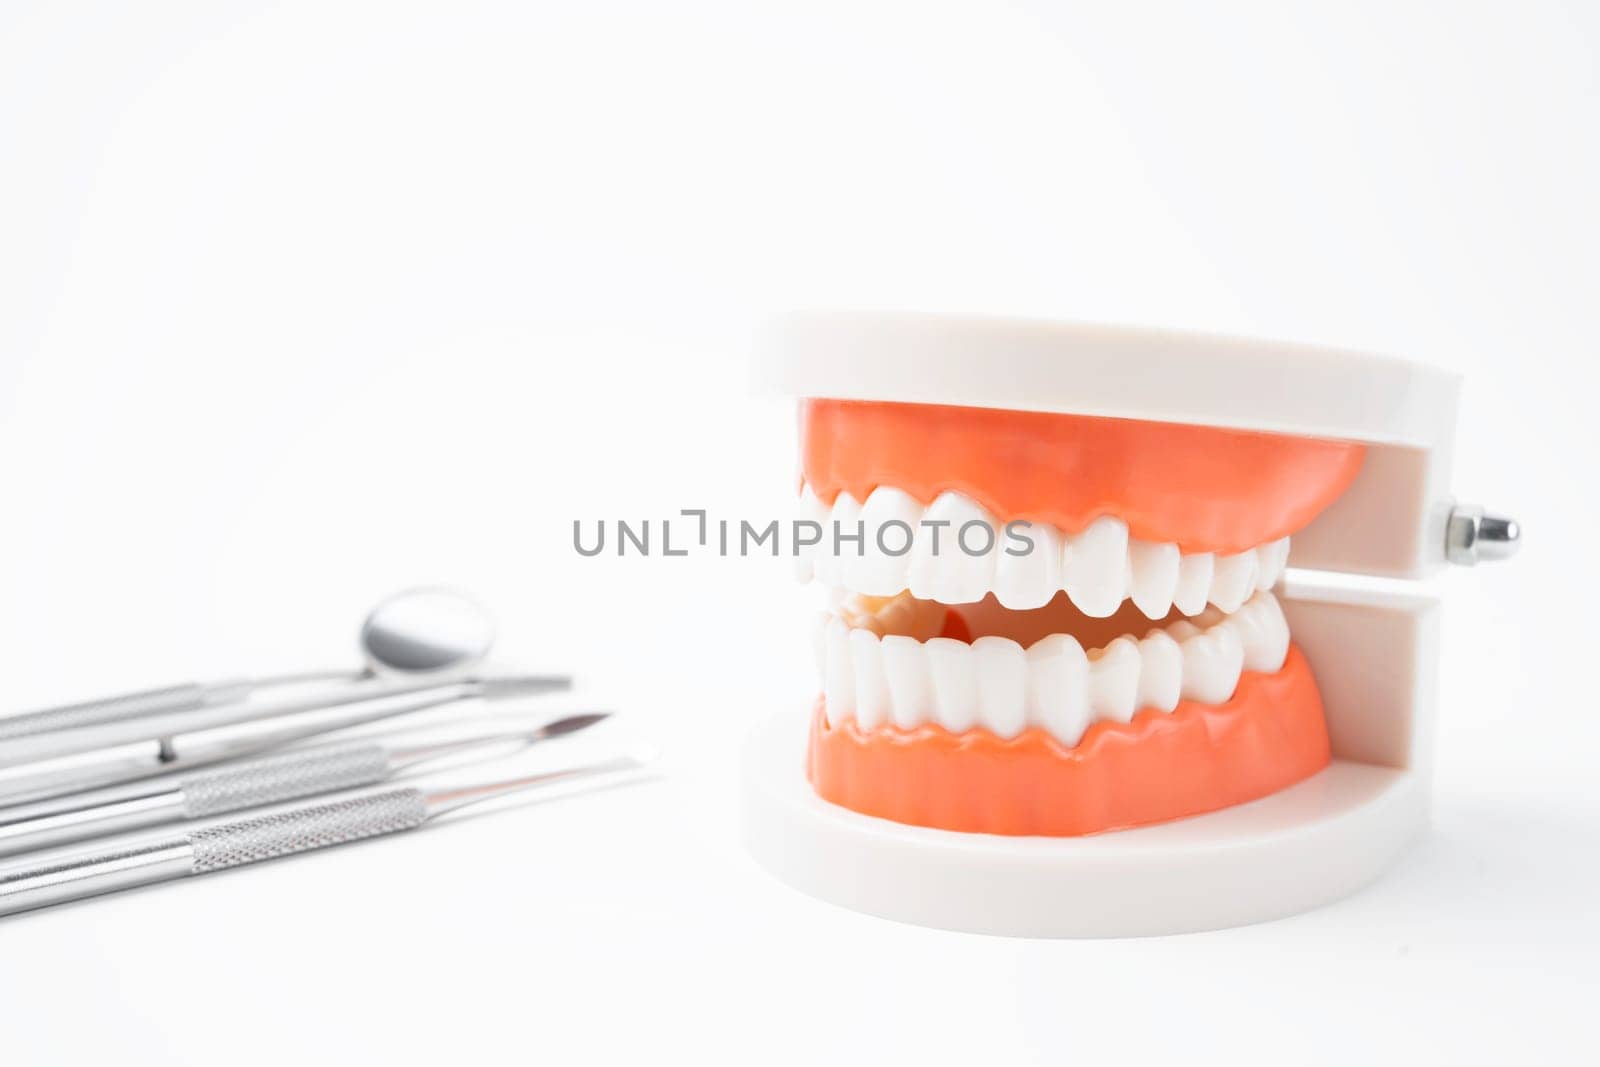 The Anatomical teeth model and dental tools on white background. by Gamjai